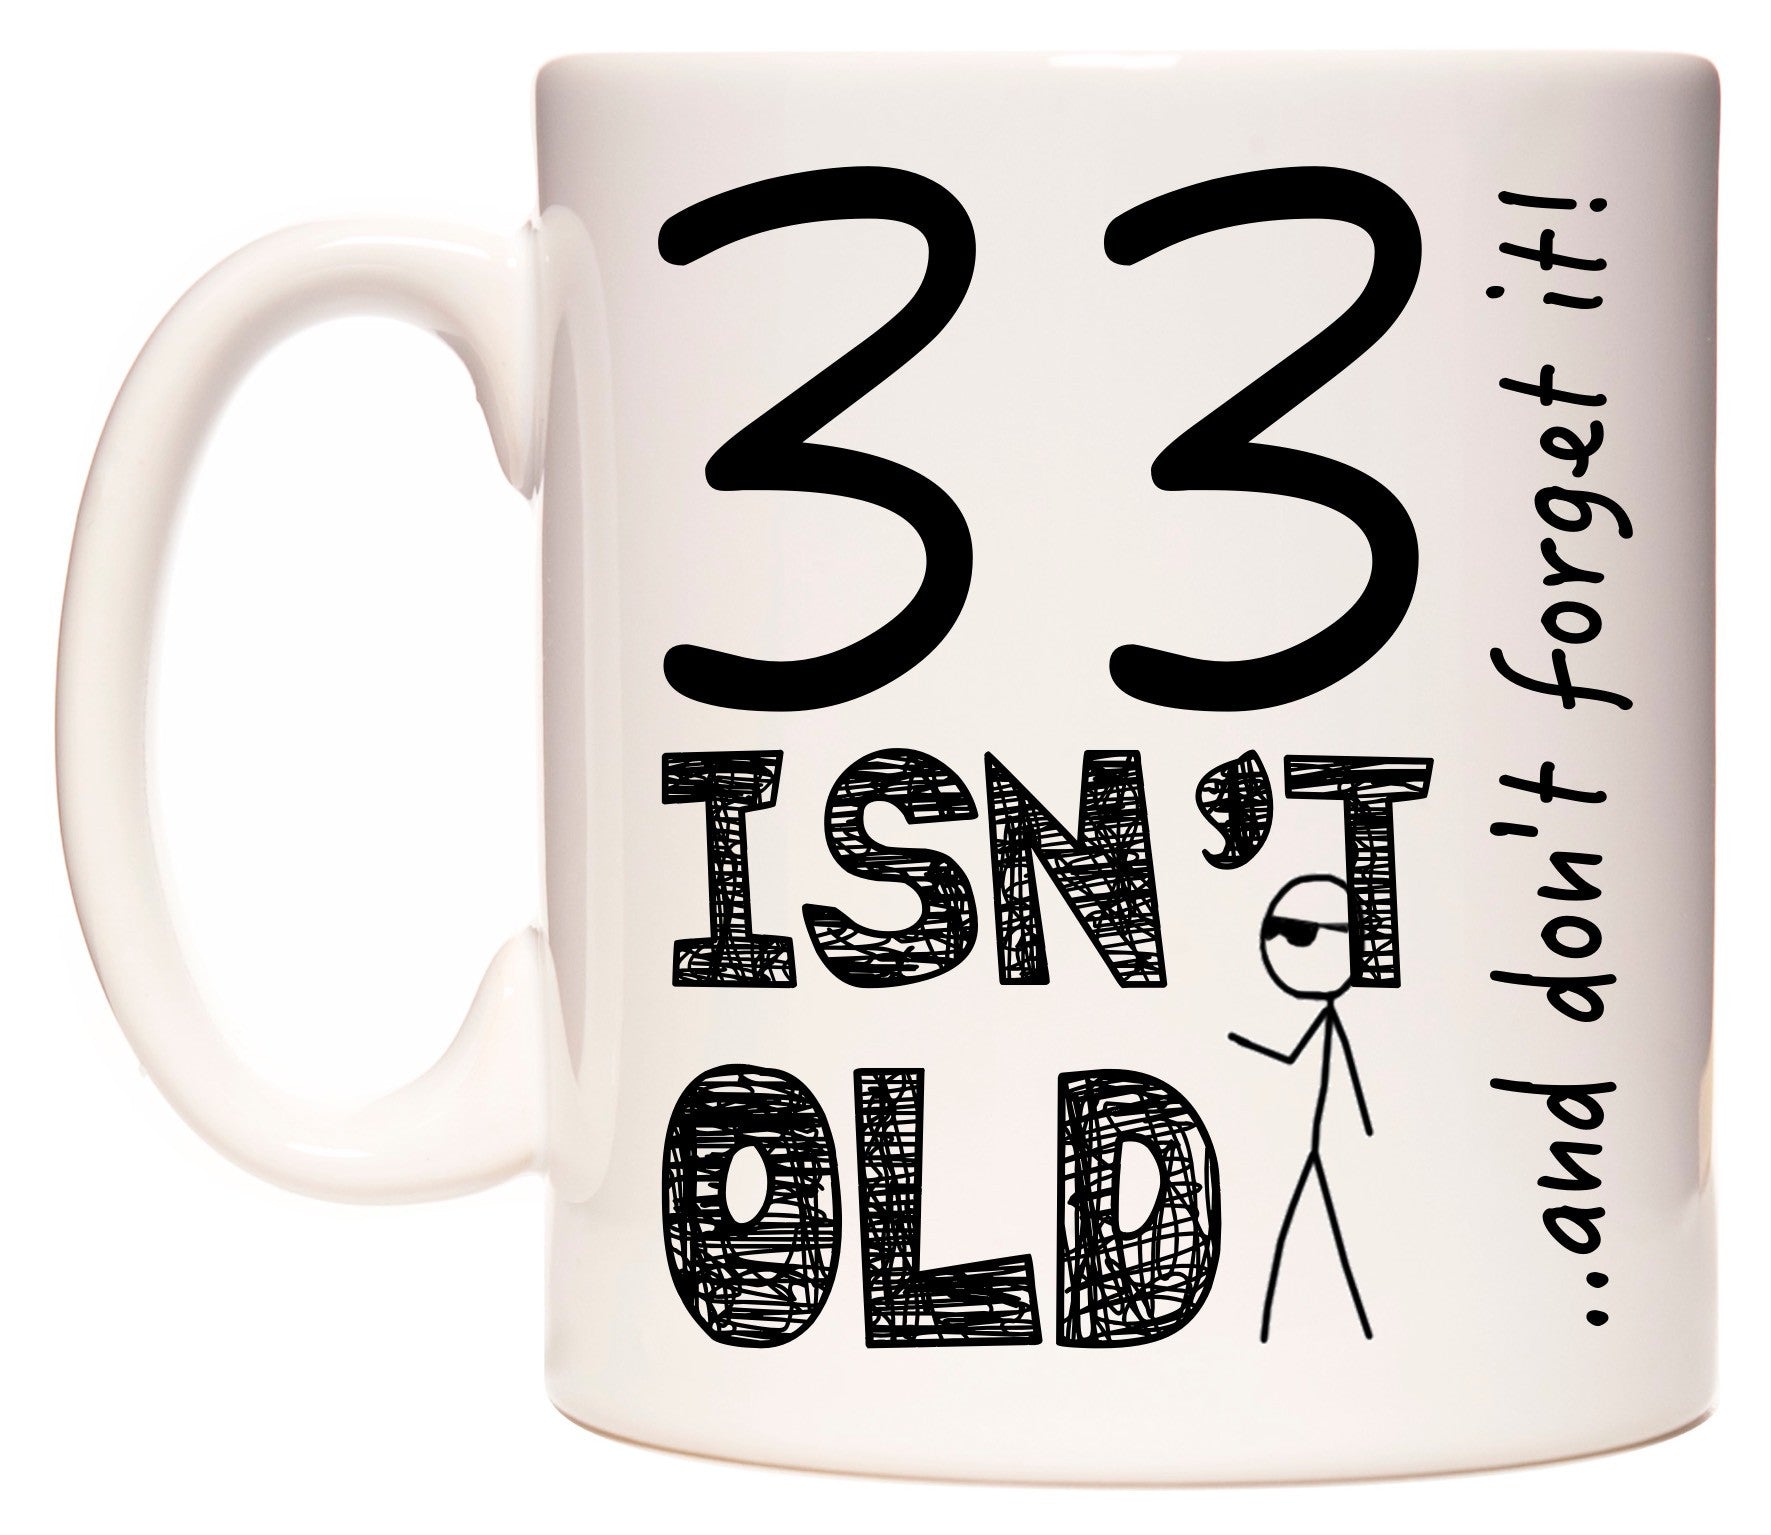 This mug features 33 Isn't Old